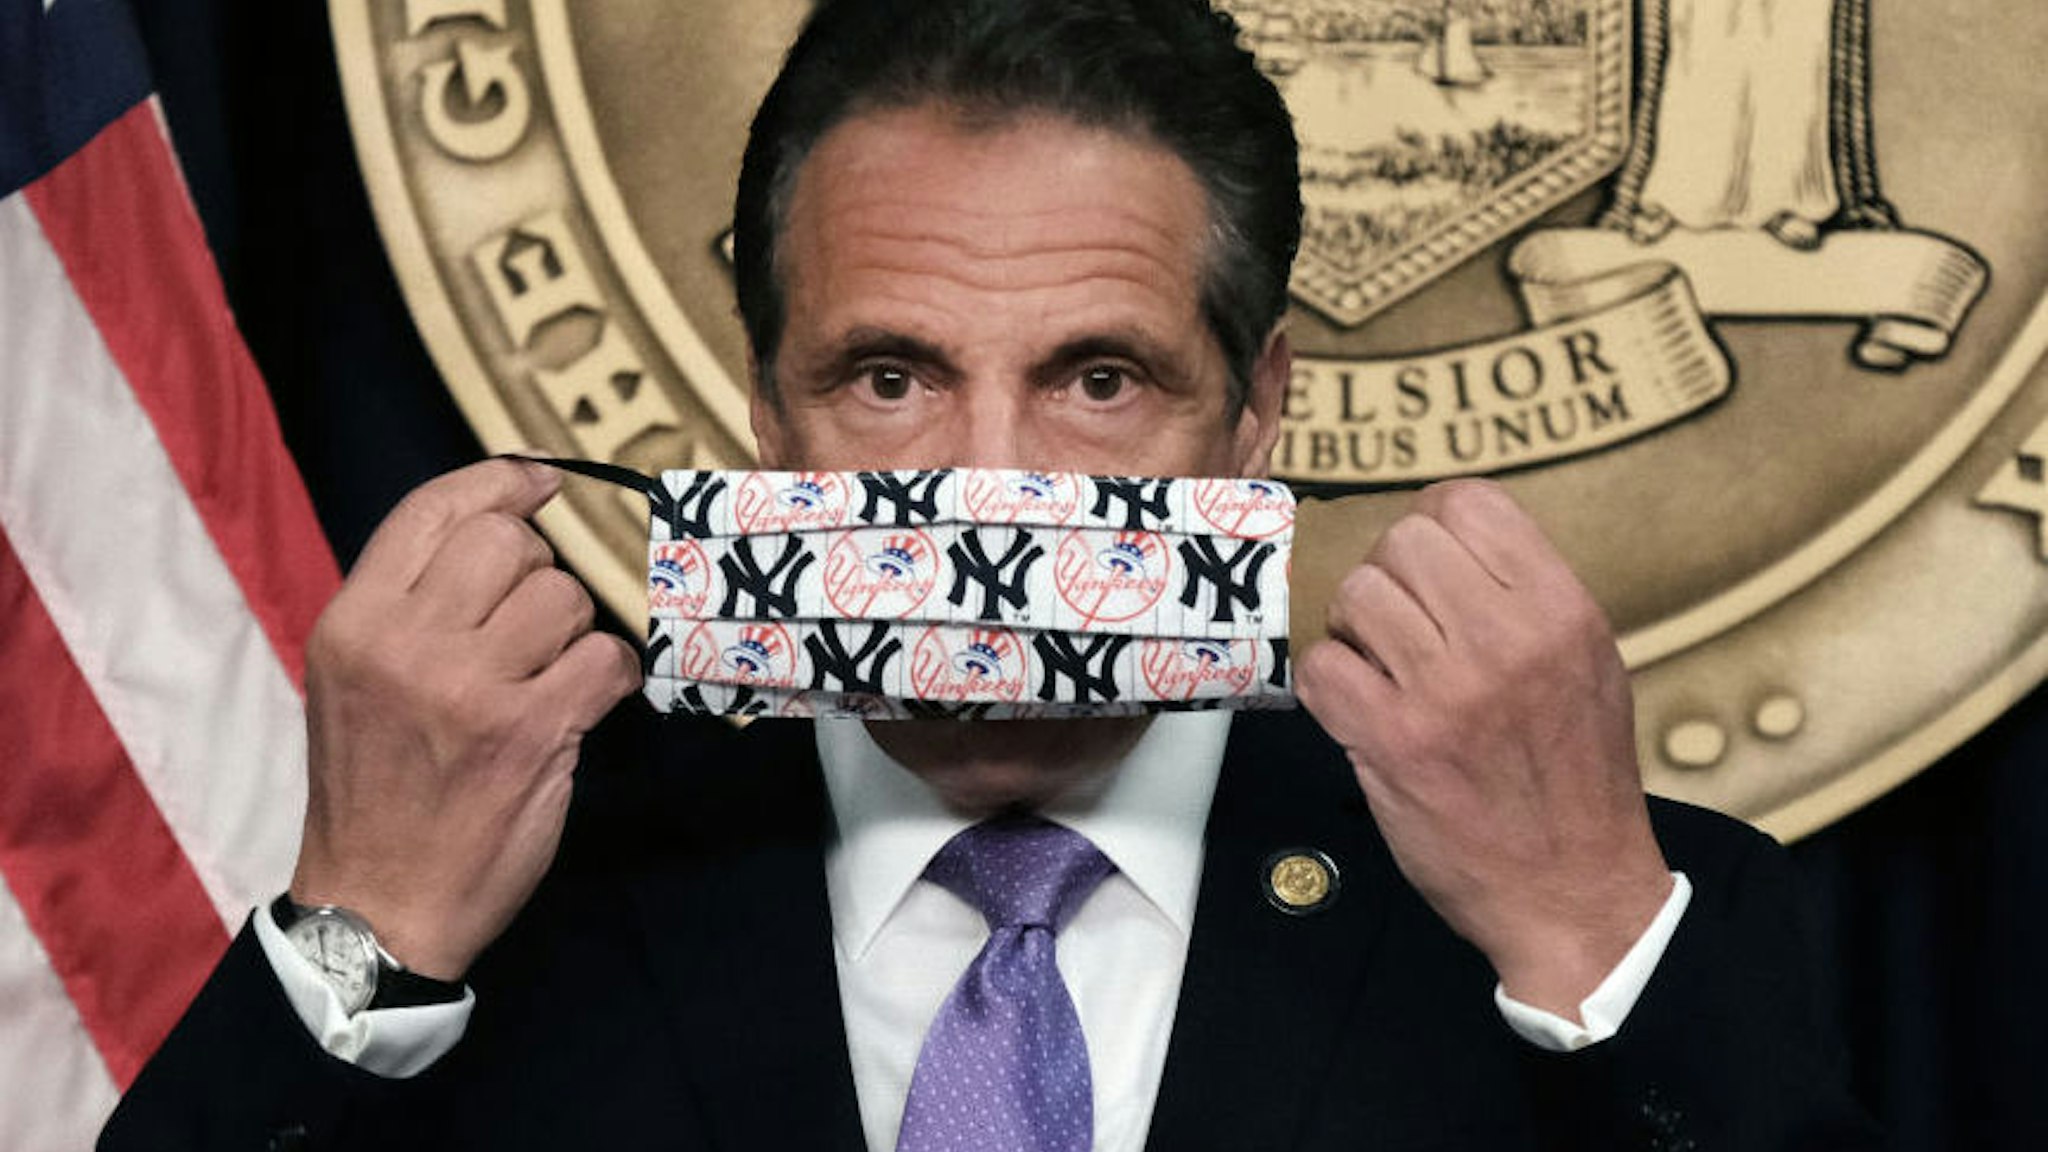 New York Governor Andrew Cuomo speaks to the media at a news conference in Manhattan on May 05, 2021 in New York City.